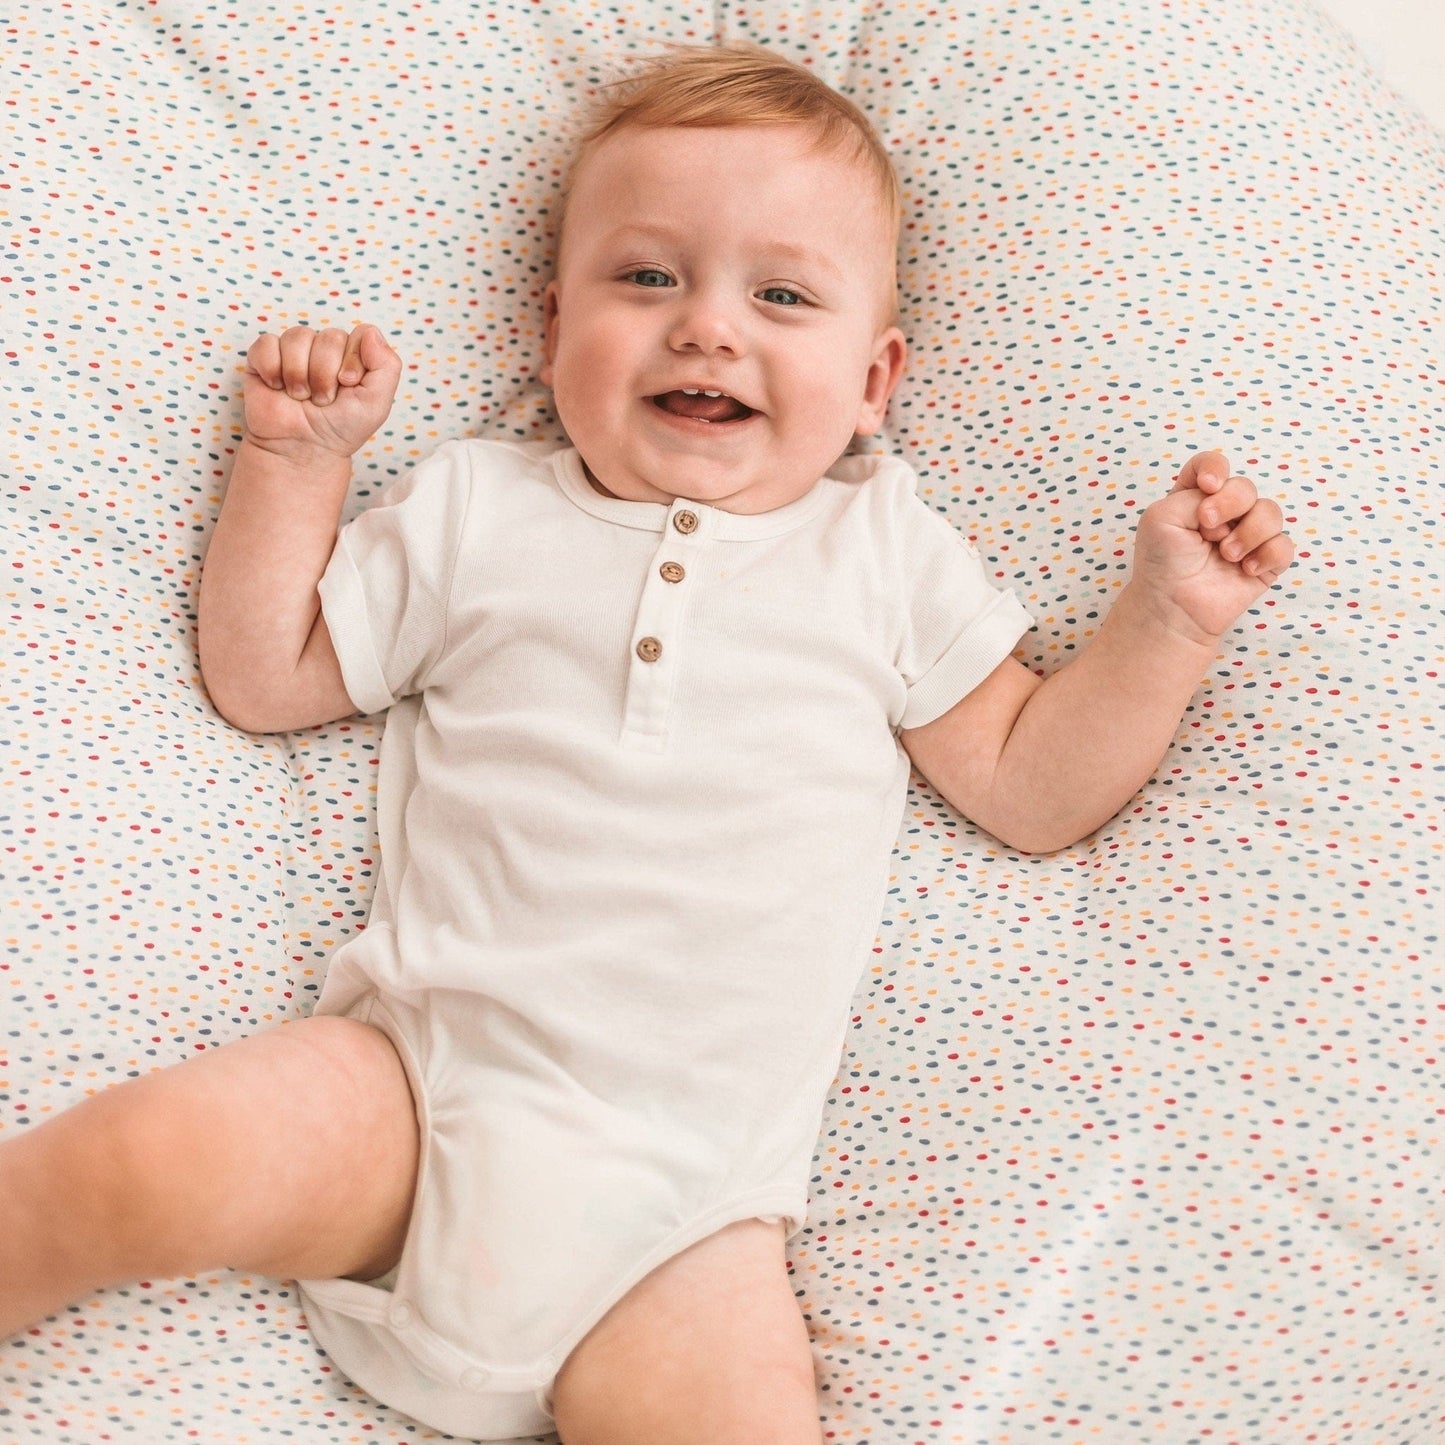 close up of smiling baby lying on MINICAMP Big Floor Cushion With Pompoms in Colour Drops on White